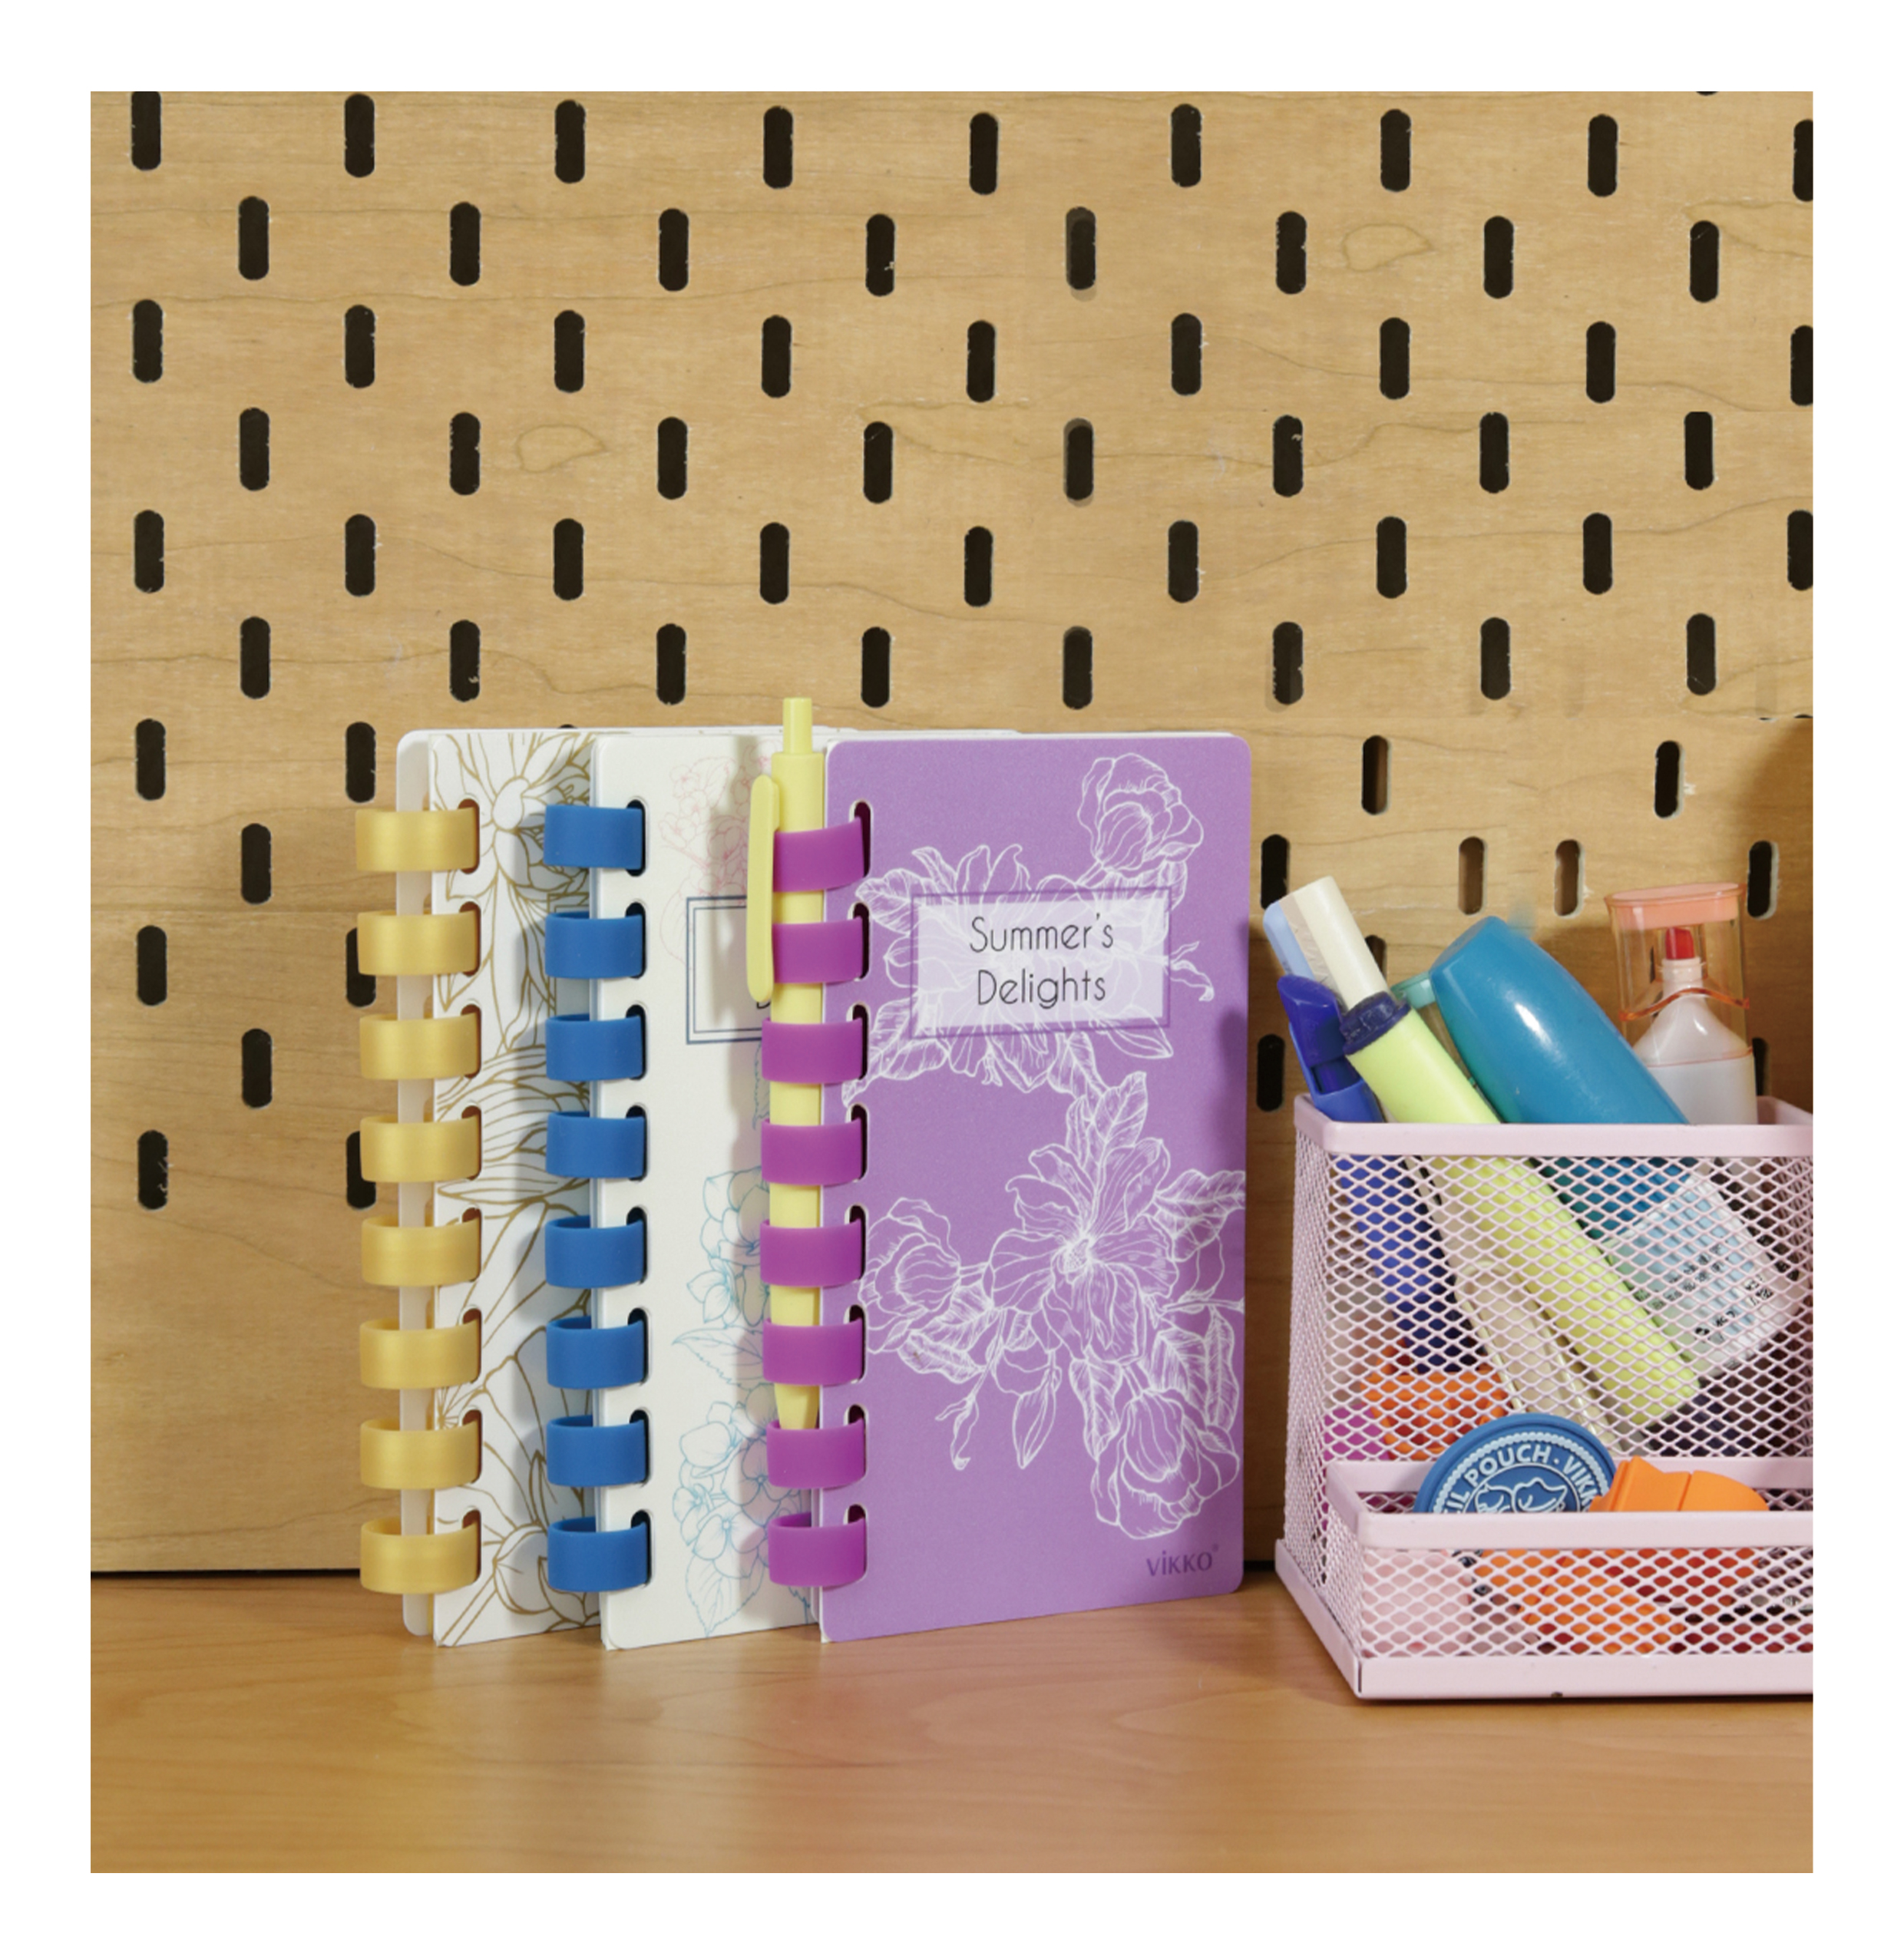 A6 SILICONERING NOTE BOOK - Silicone ring notebooks - 3